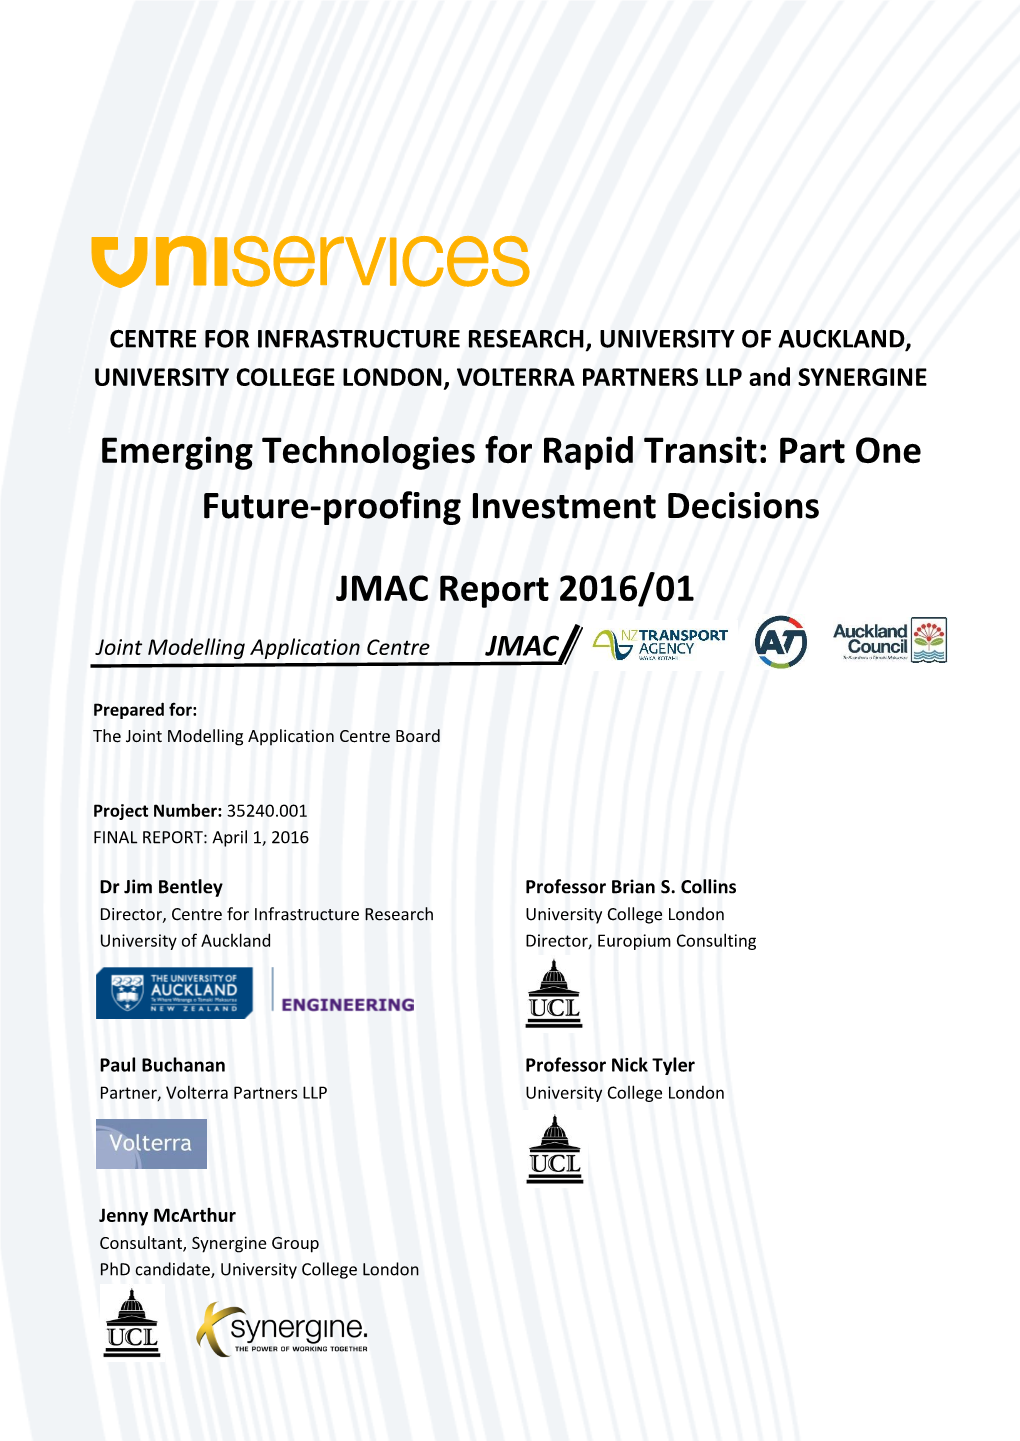 Emerging Technologies for Rapid Transit: Part One Future-Proofing Investment Decisions